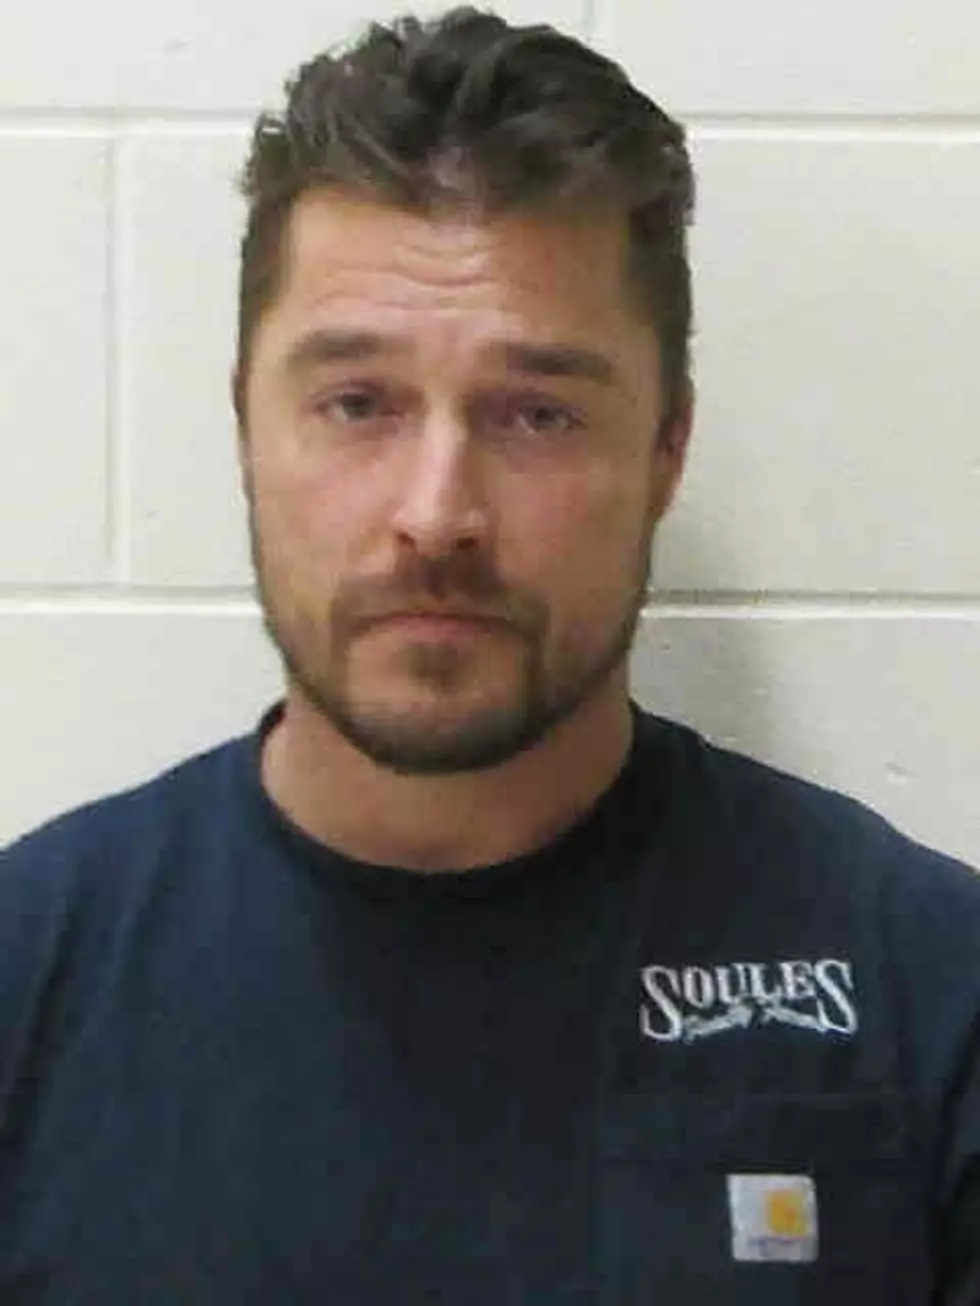 Attorney&#8217;s For Chris Soules Ask For Dismissal